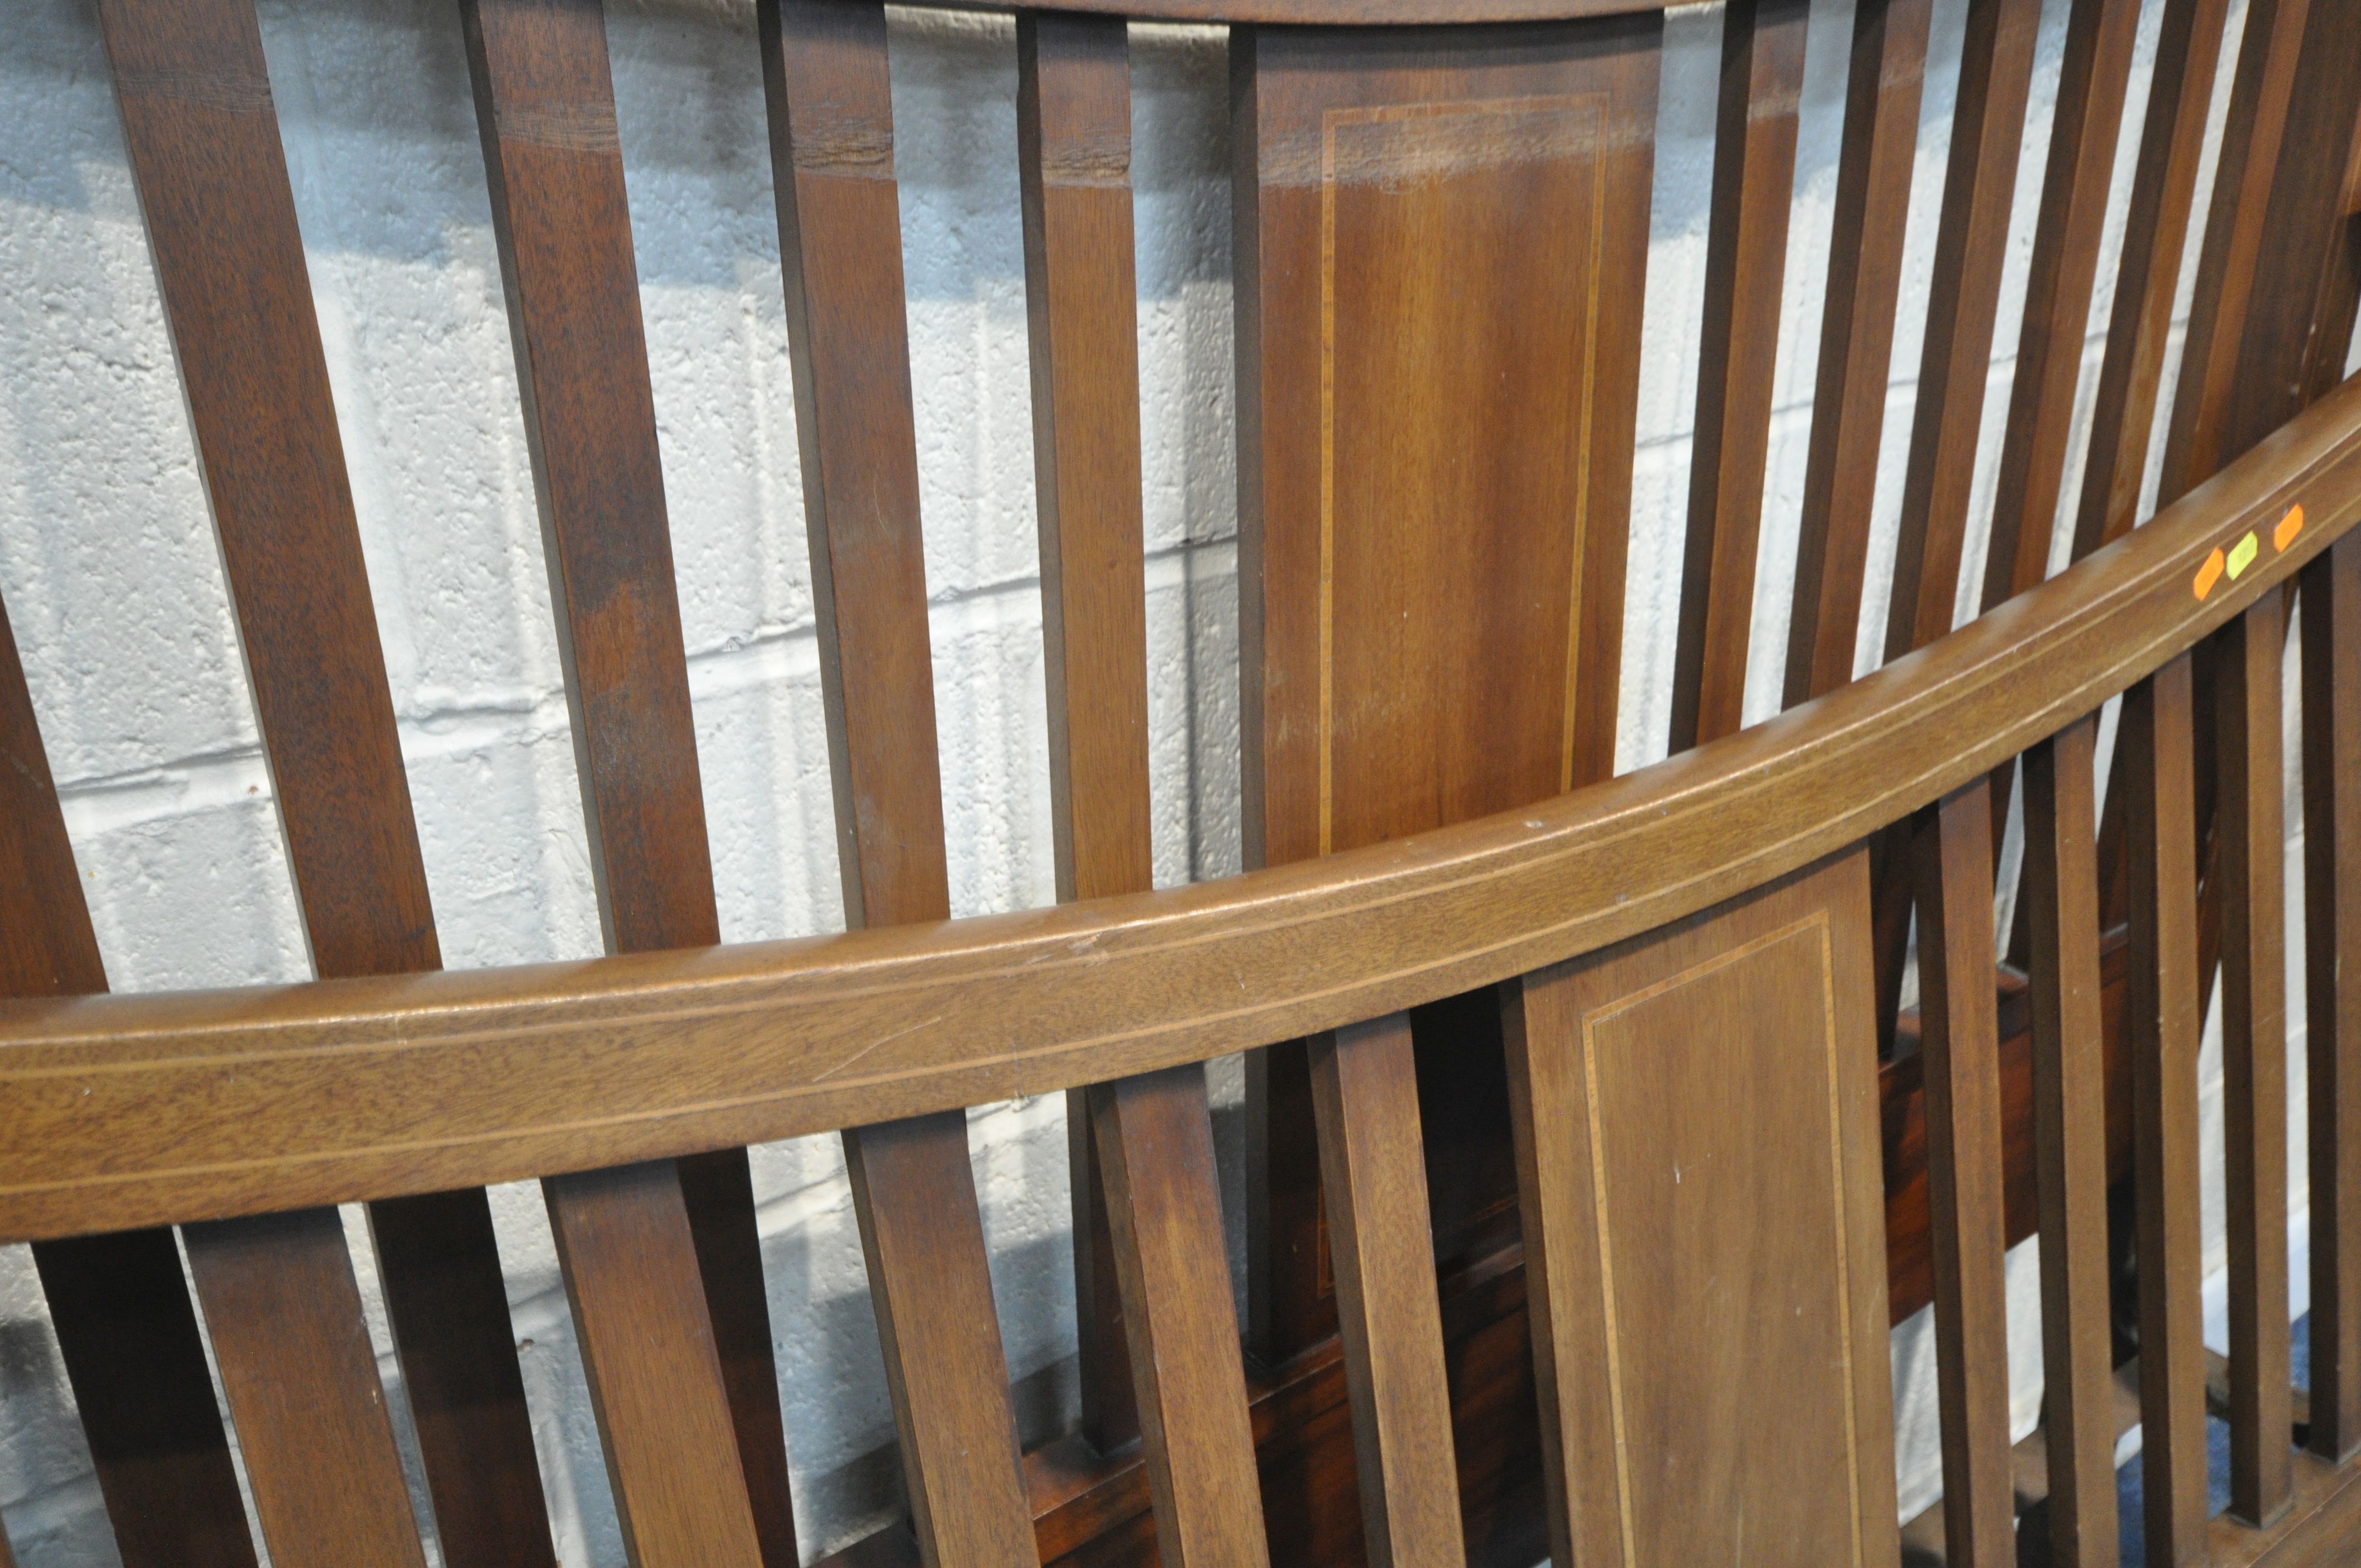 AN EDWARDIAN MAHOGANY 4FT6 BEDSTEAD, with side rails and slats (condition - scuffs and scratches) - Image 2 of 3